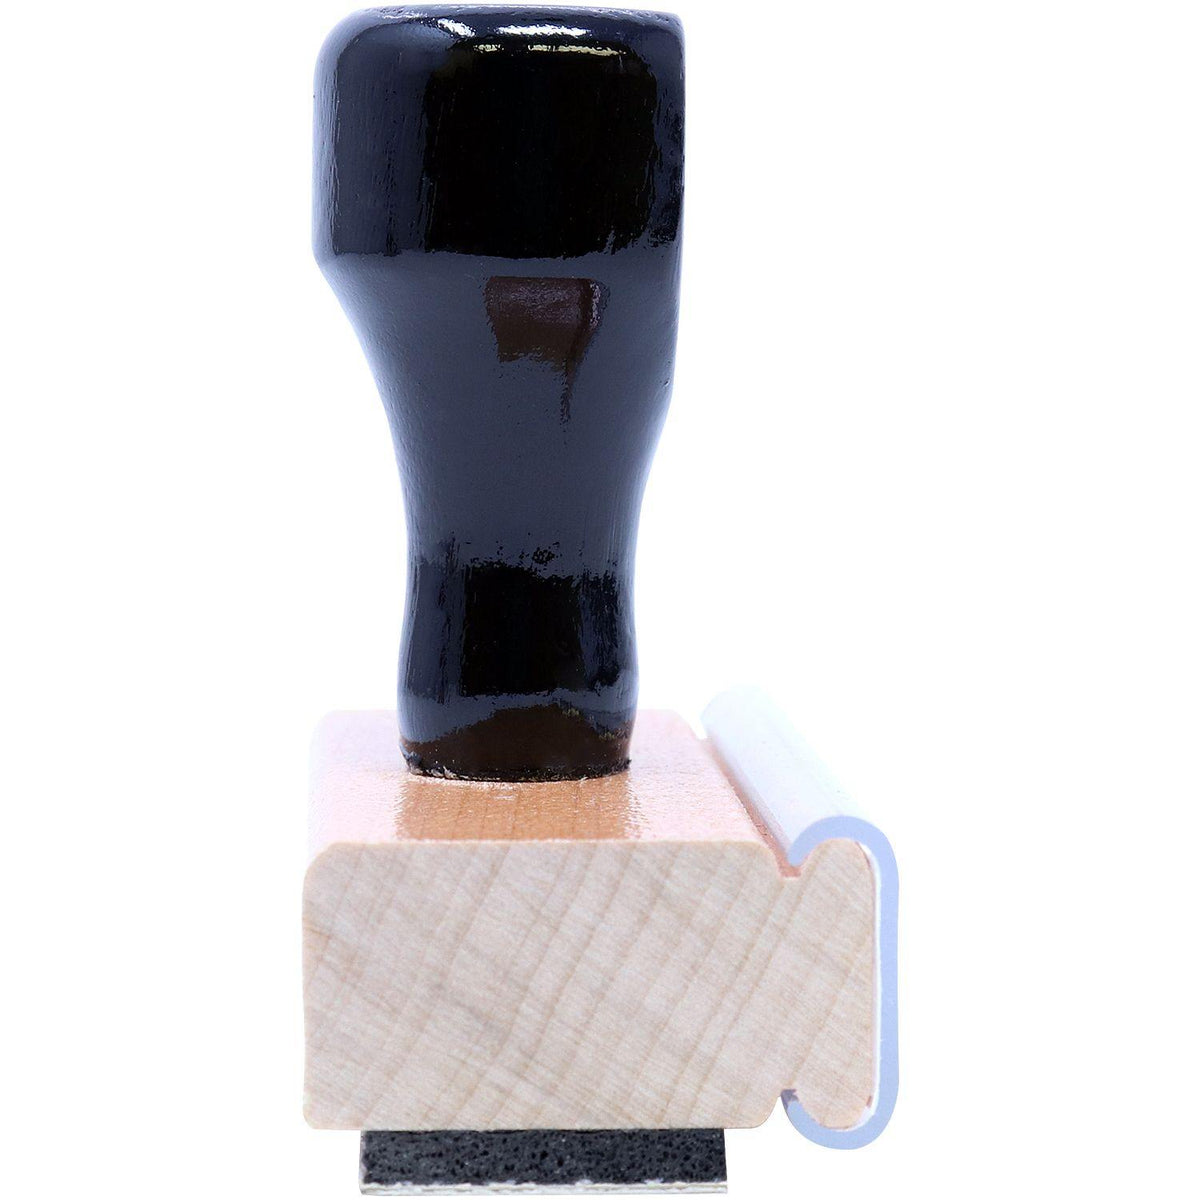 Large Urgent Rubber Stamp - Engineer Seal Stamps - Brand_Acorn, Impression Size_Large, Stamp Type_Regular Stamp, Type of Use_Office